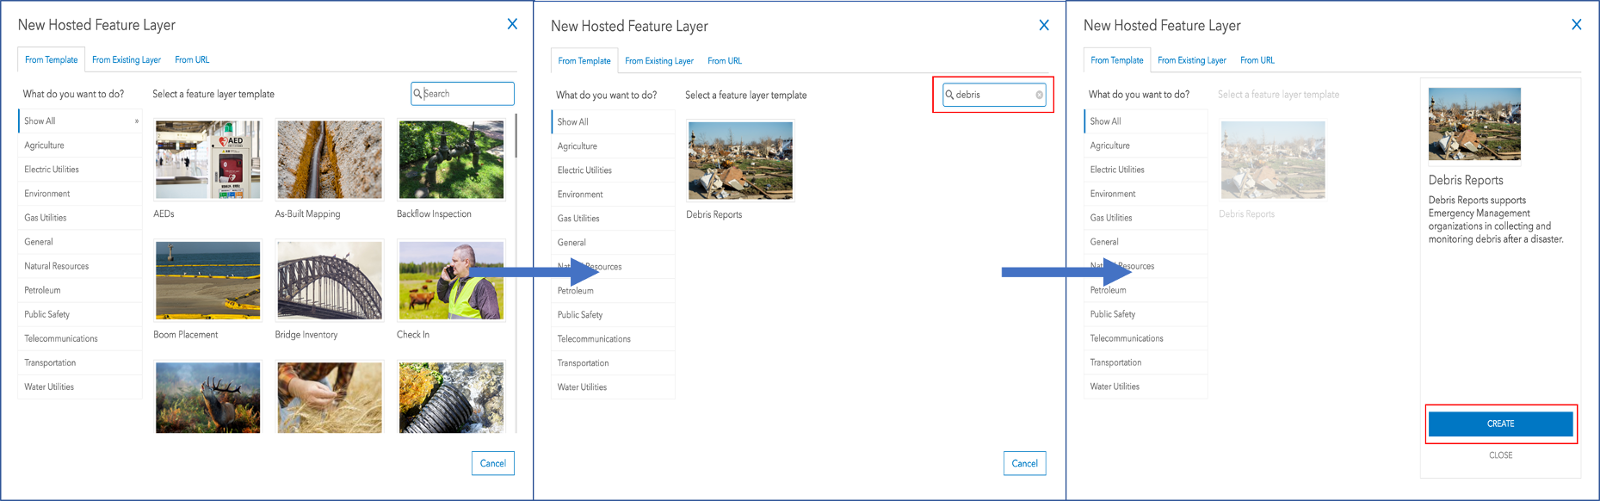 Start creating a hosted feature layer